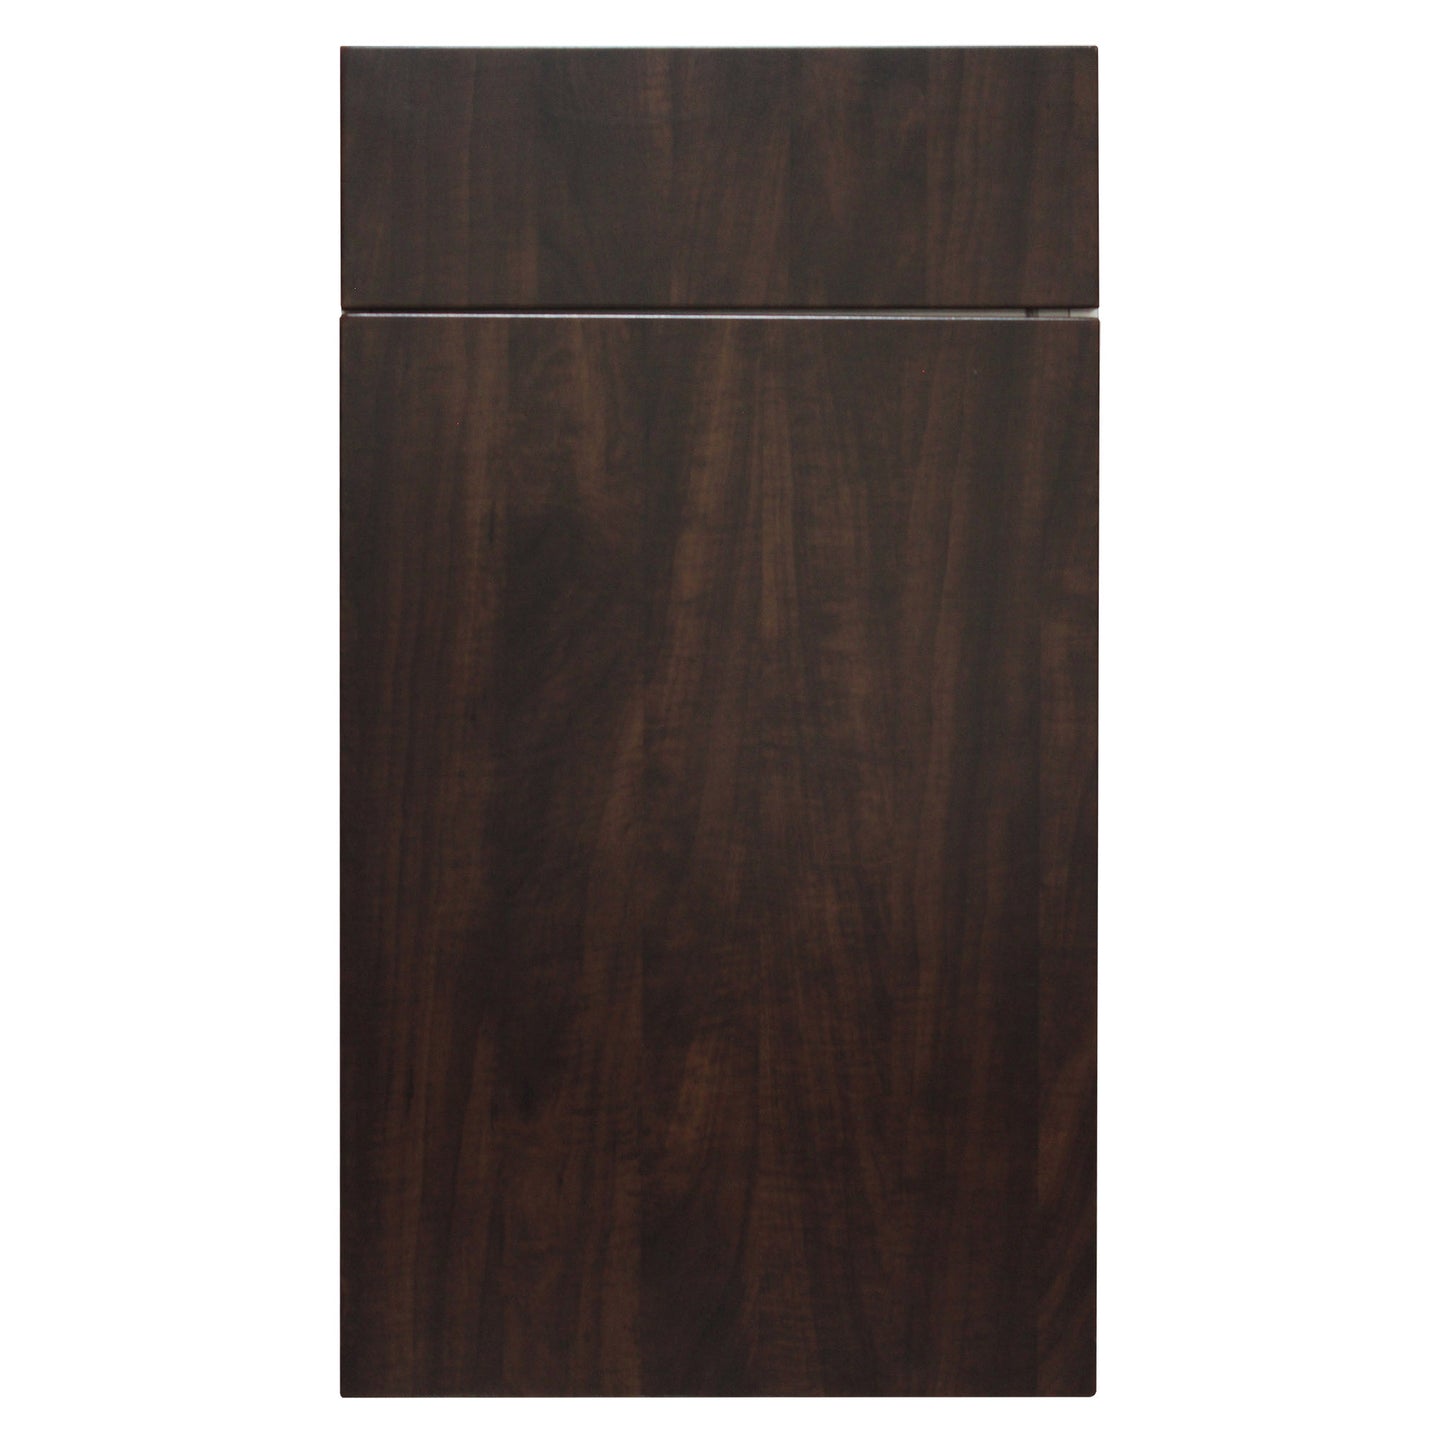 Chocolate German Wood Grain Door - Quality Kitchens For Less